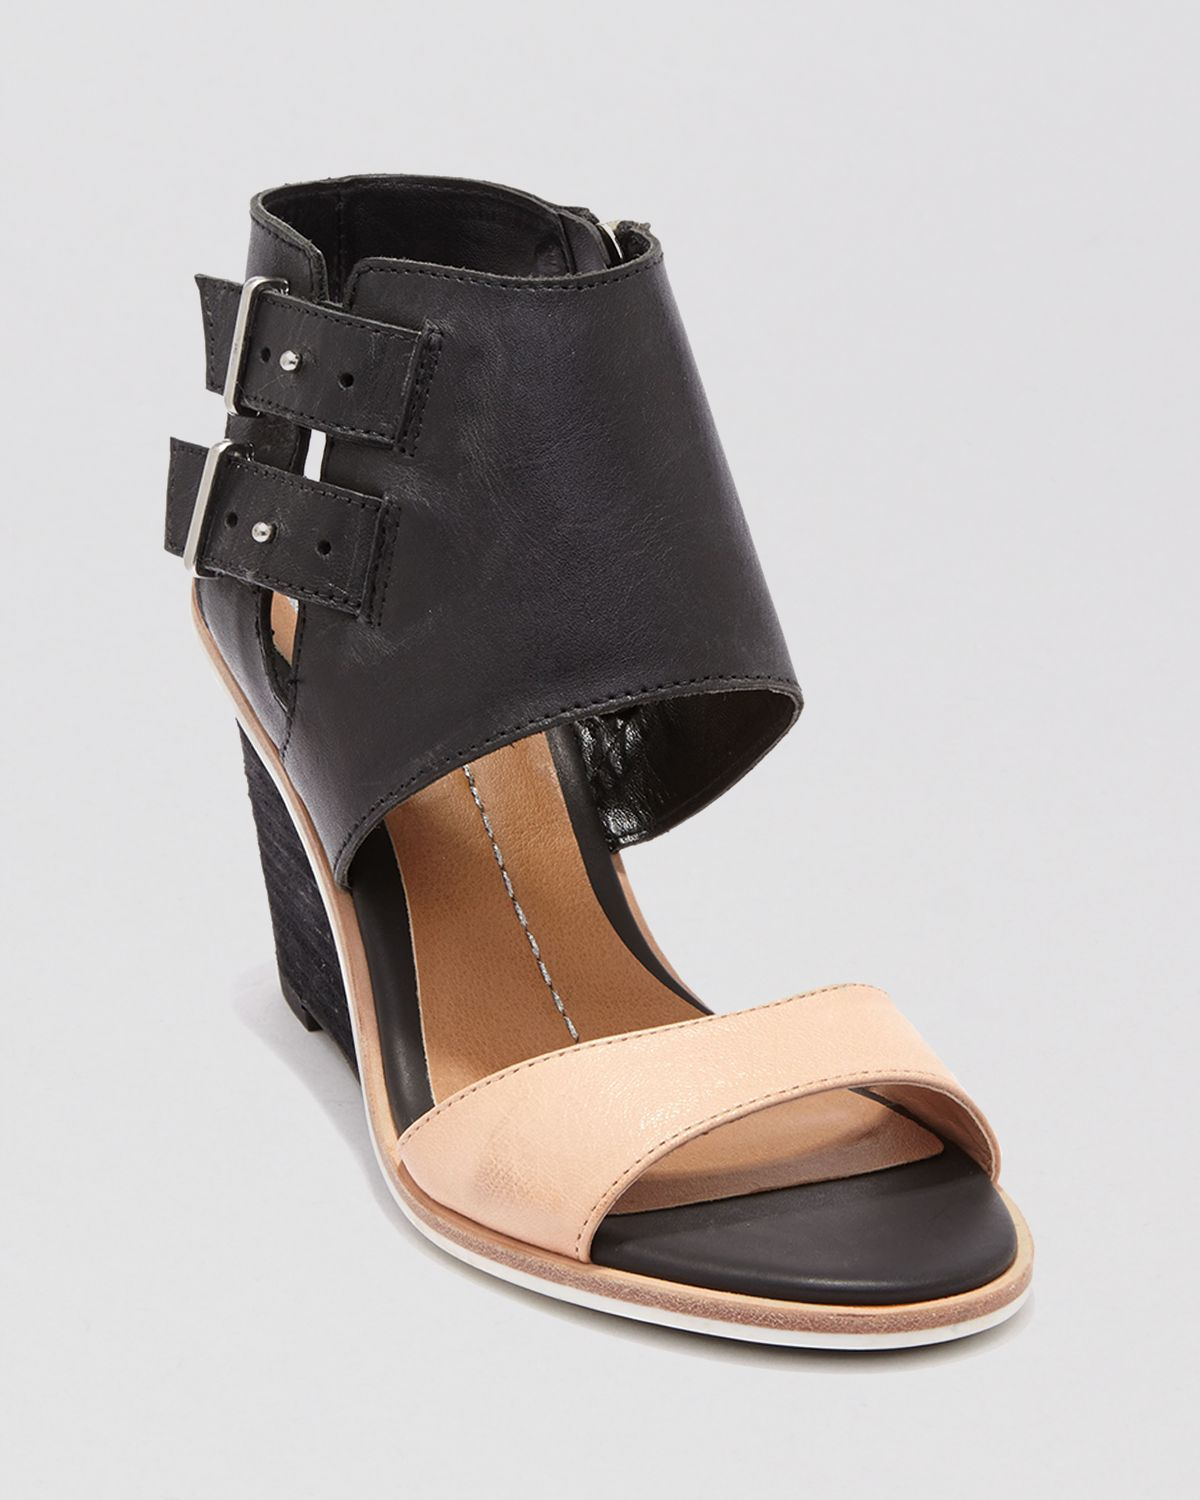 Dolce Vita Leather Lindsi Open-toe Wedge Sandals in Light 